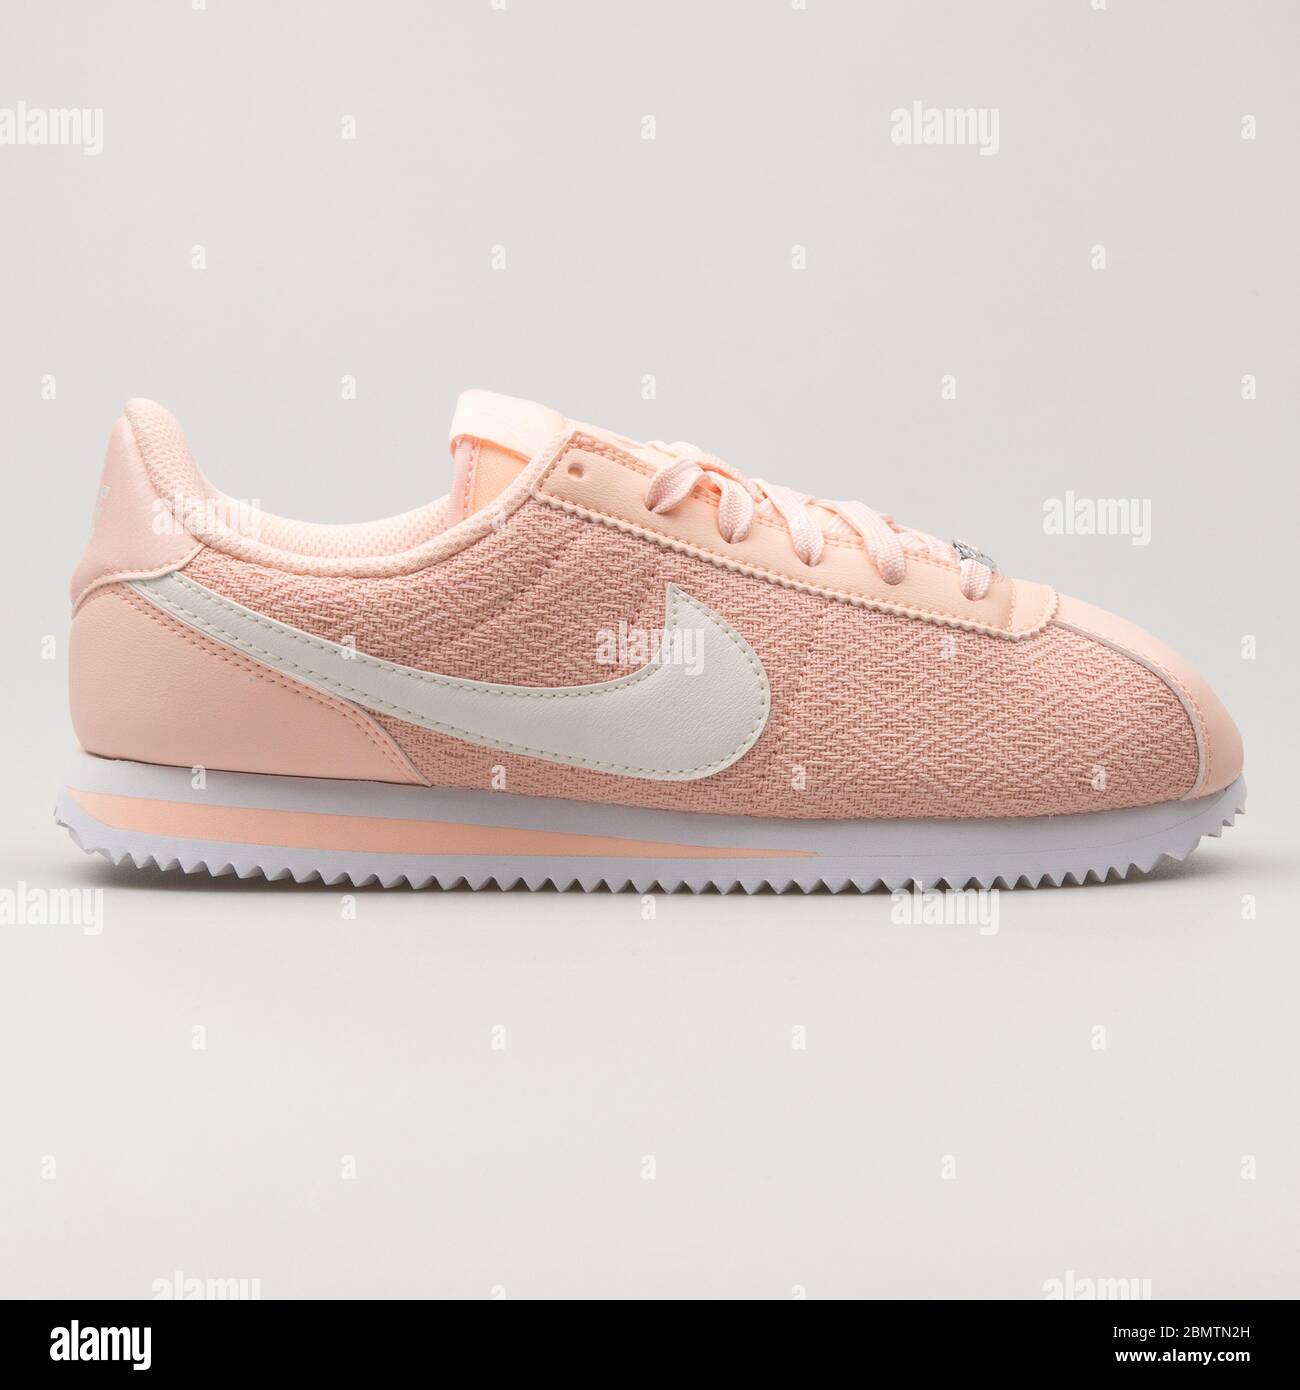 VIENNA, AUSTRIA - FEBRUARY 19, Nike Basic Textile Suede pink and sneaker on white background Stock Photo - Alamy